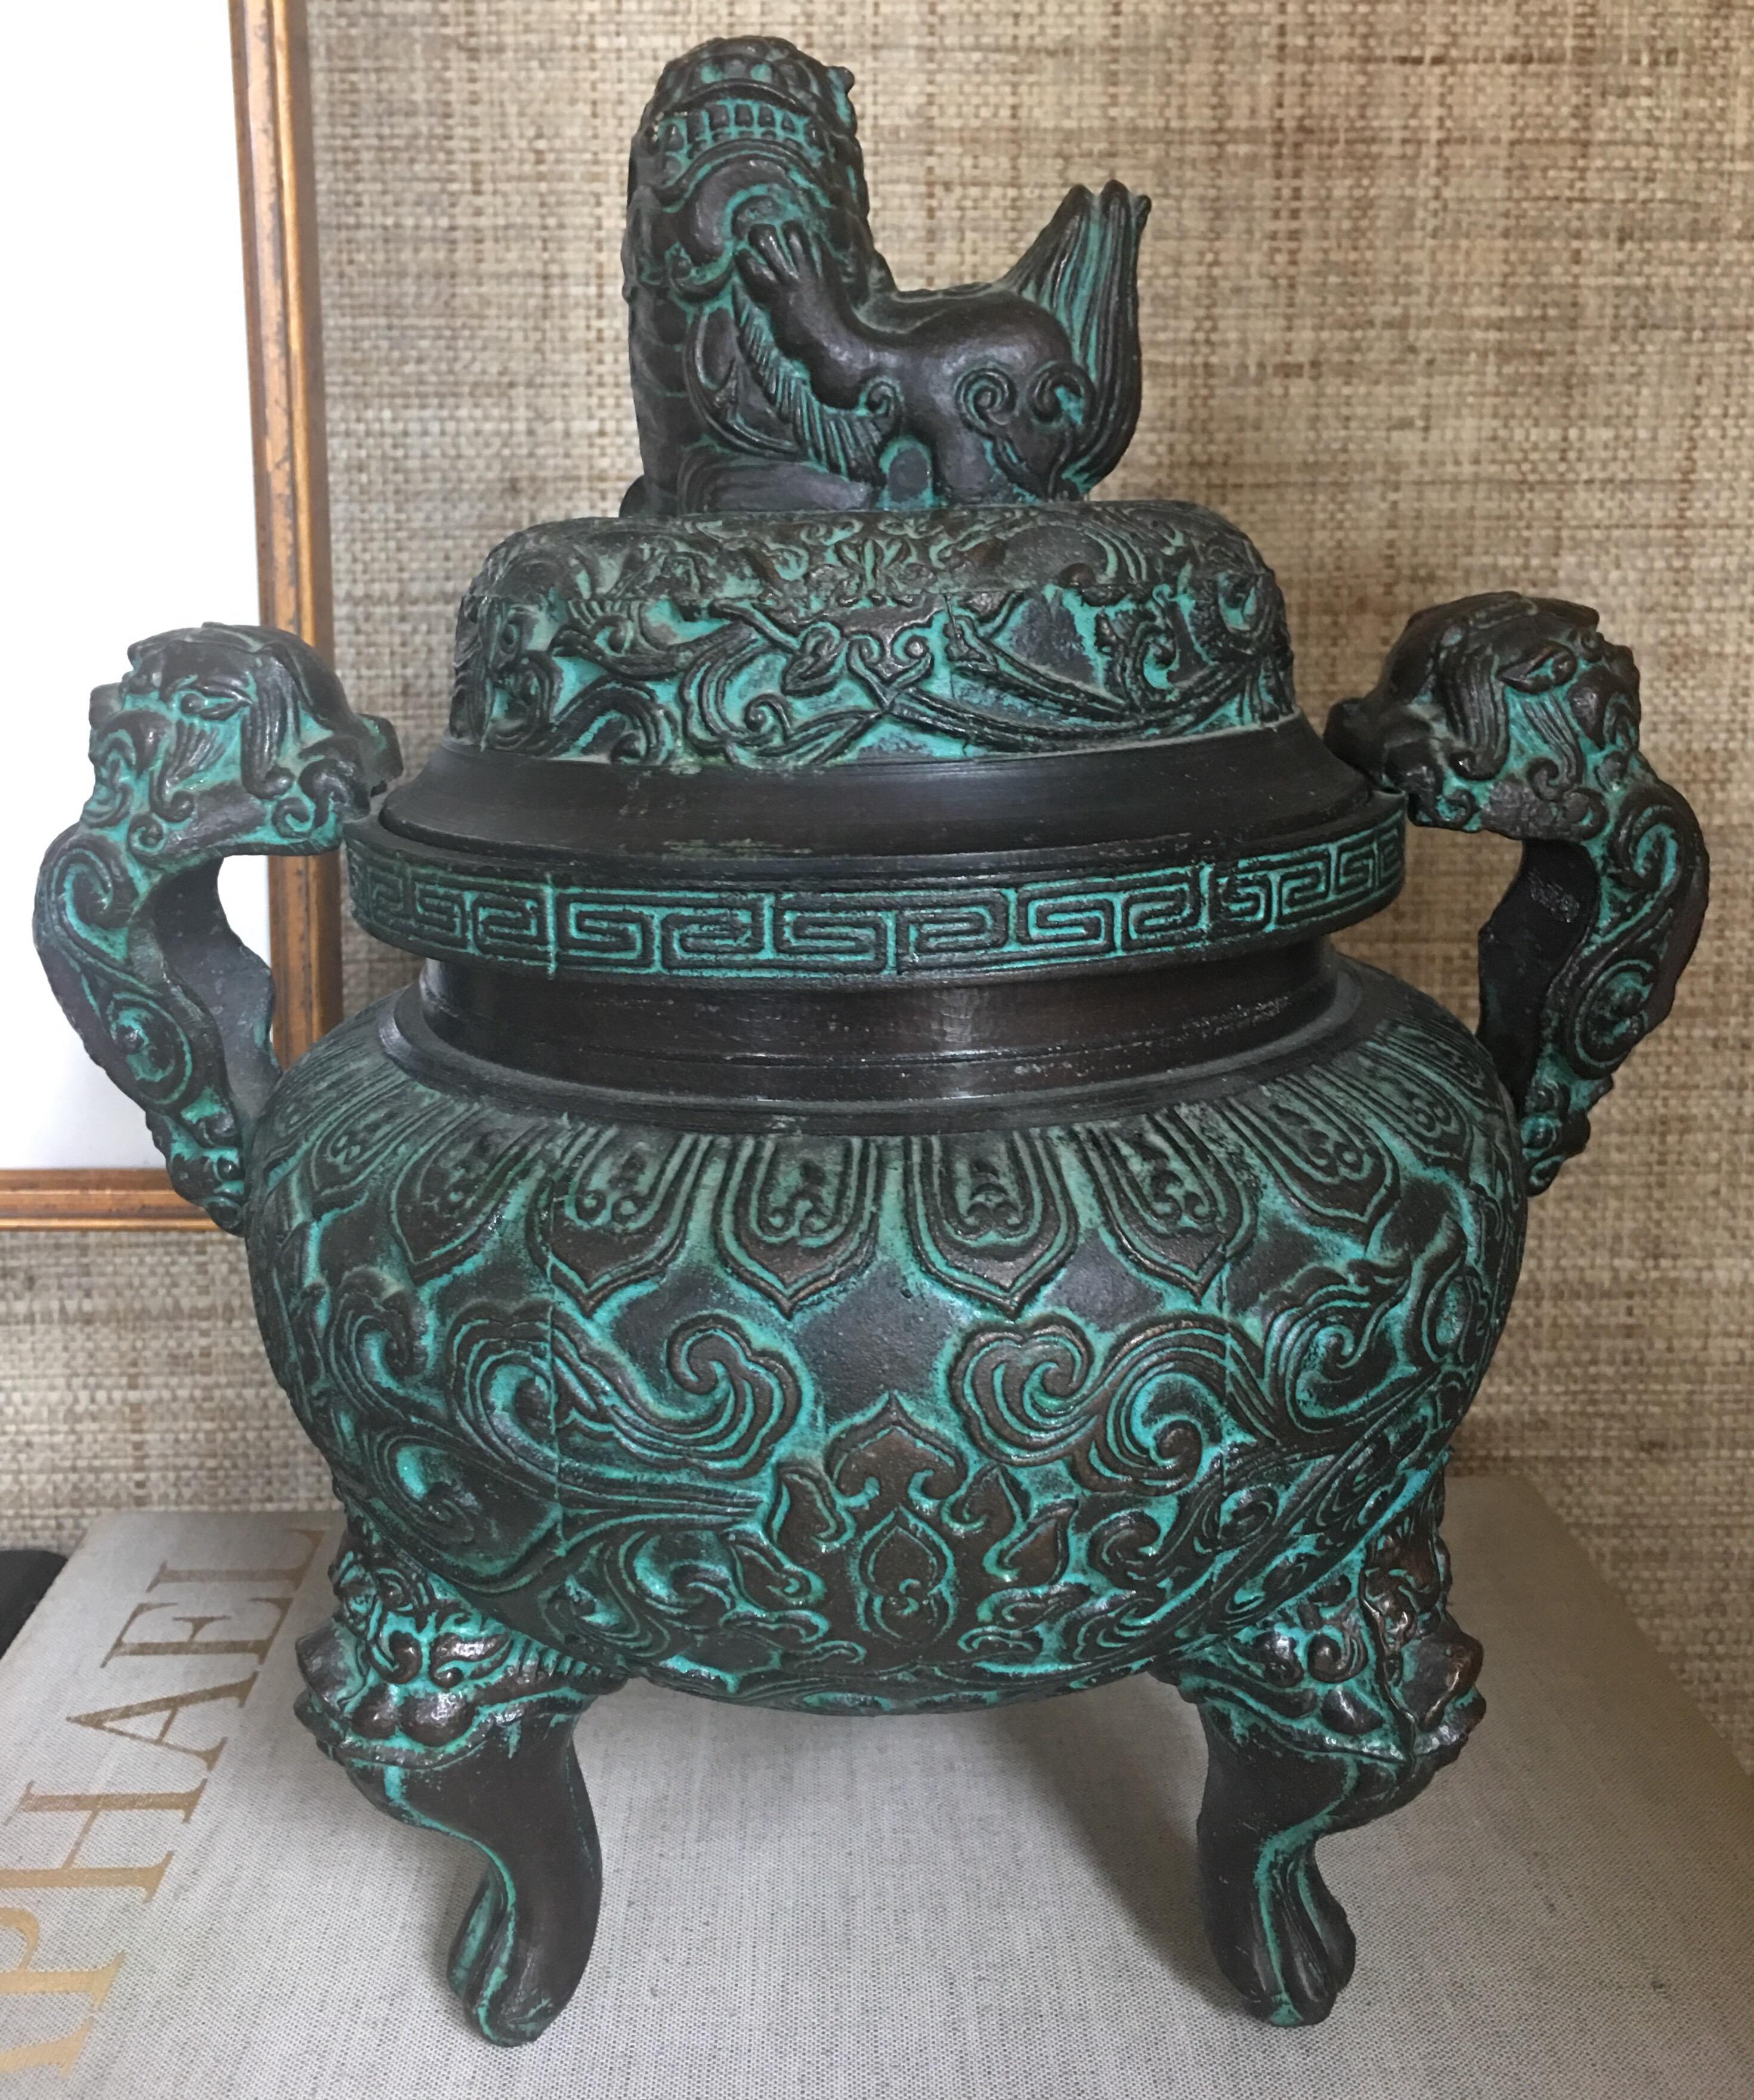 Midcentury modern era Asian style ice bucket in the manner of James Mont. This highly detailed metal piece features a faux bronze verdigrises’ finish and intricate geometric engraving and embossing. The interior is lined with a removable turquoise